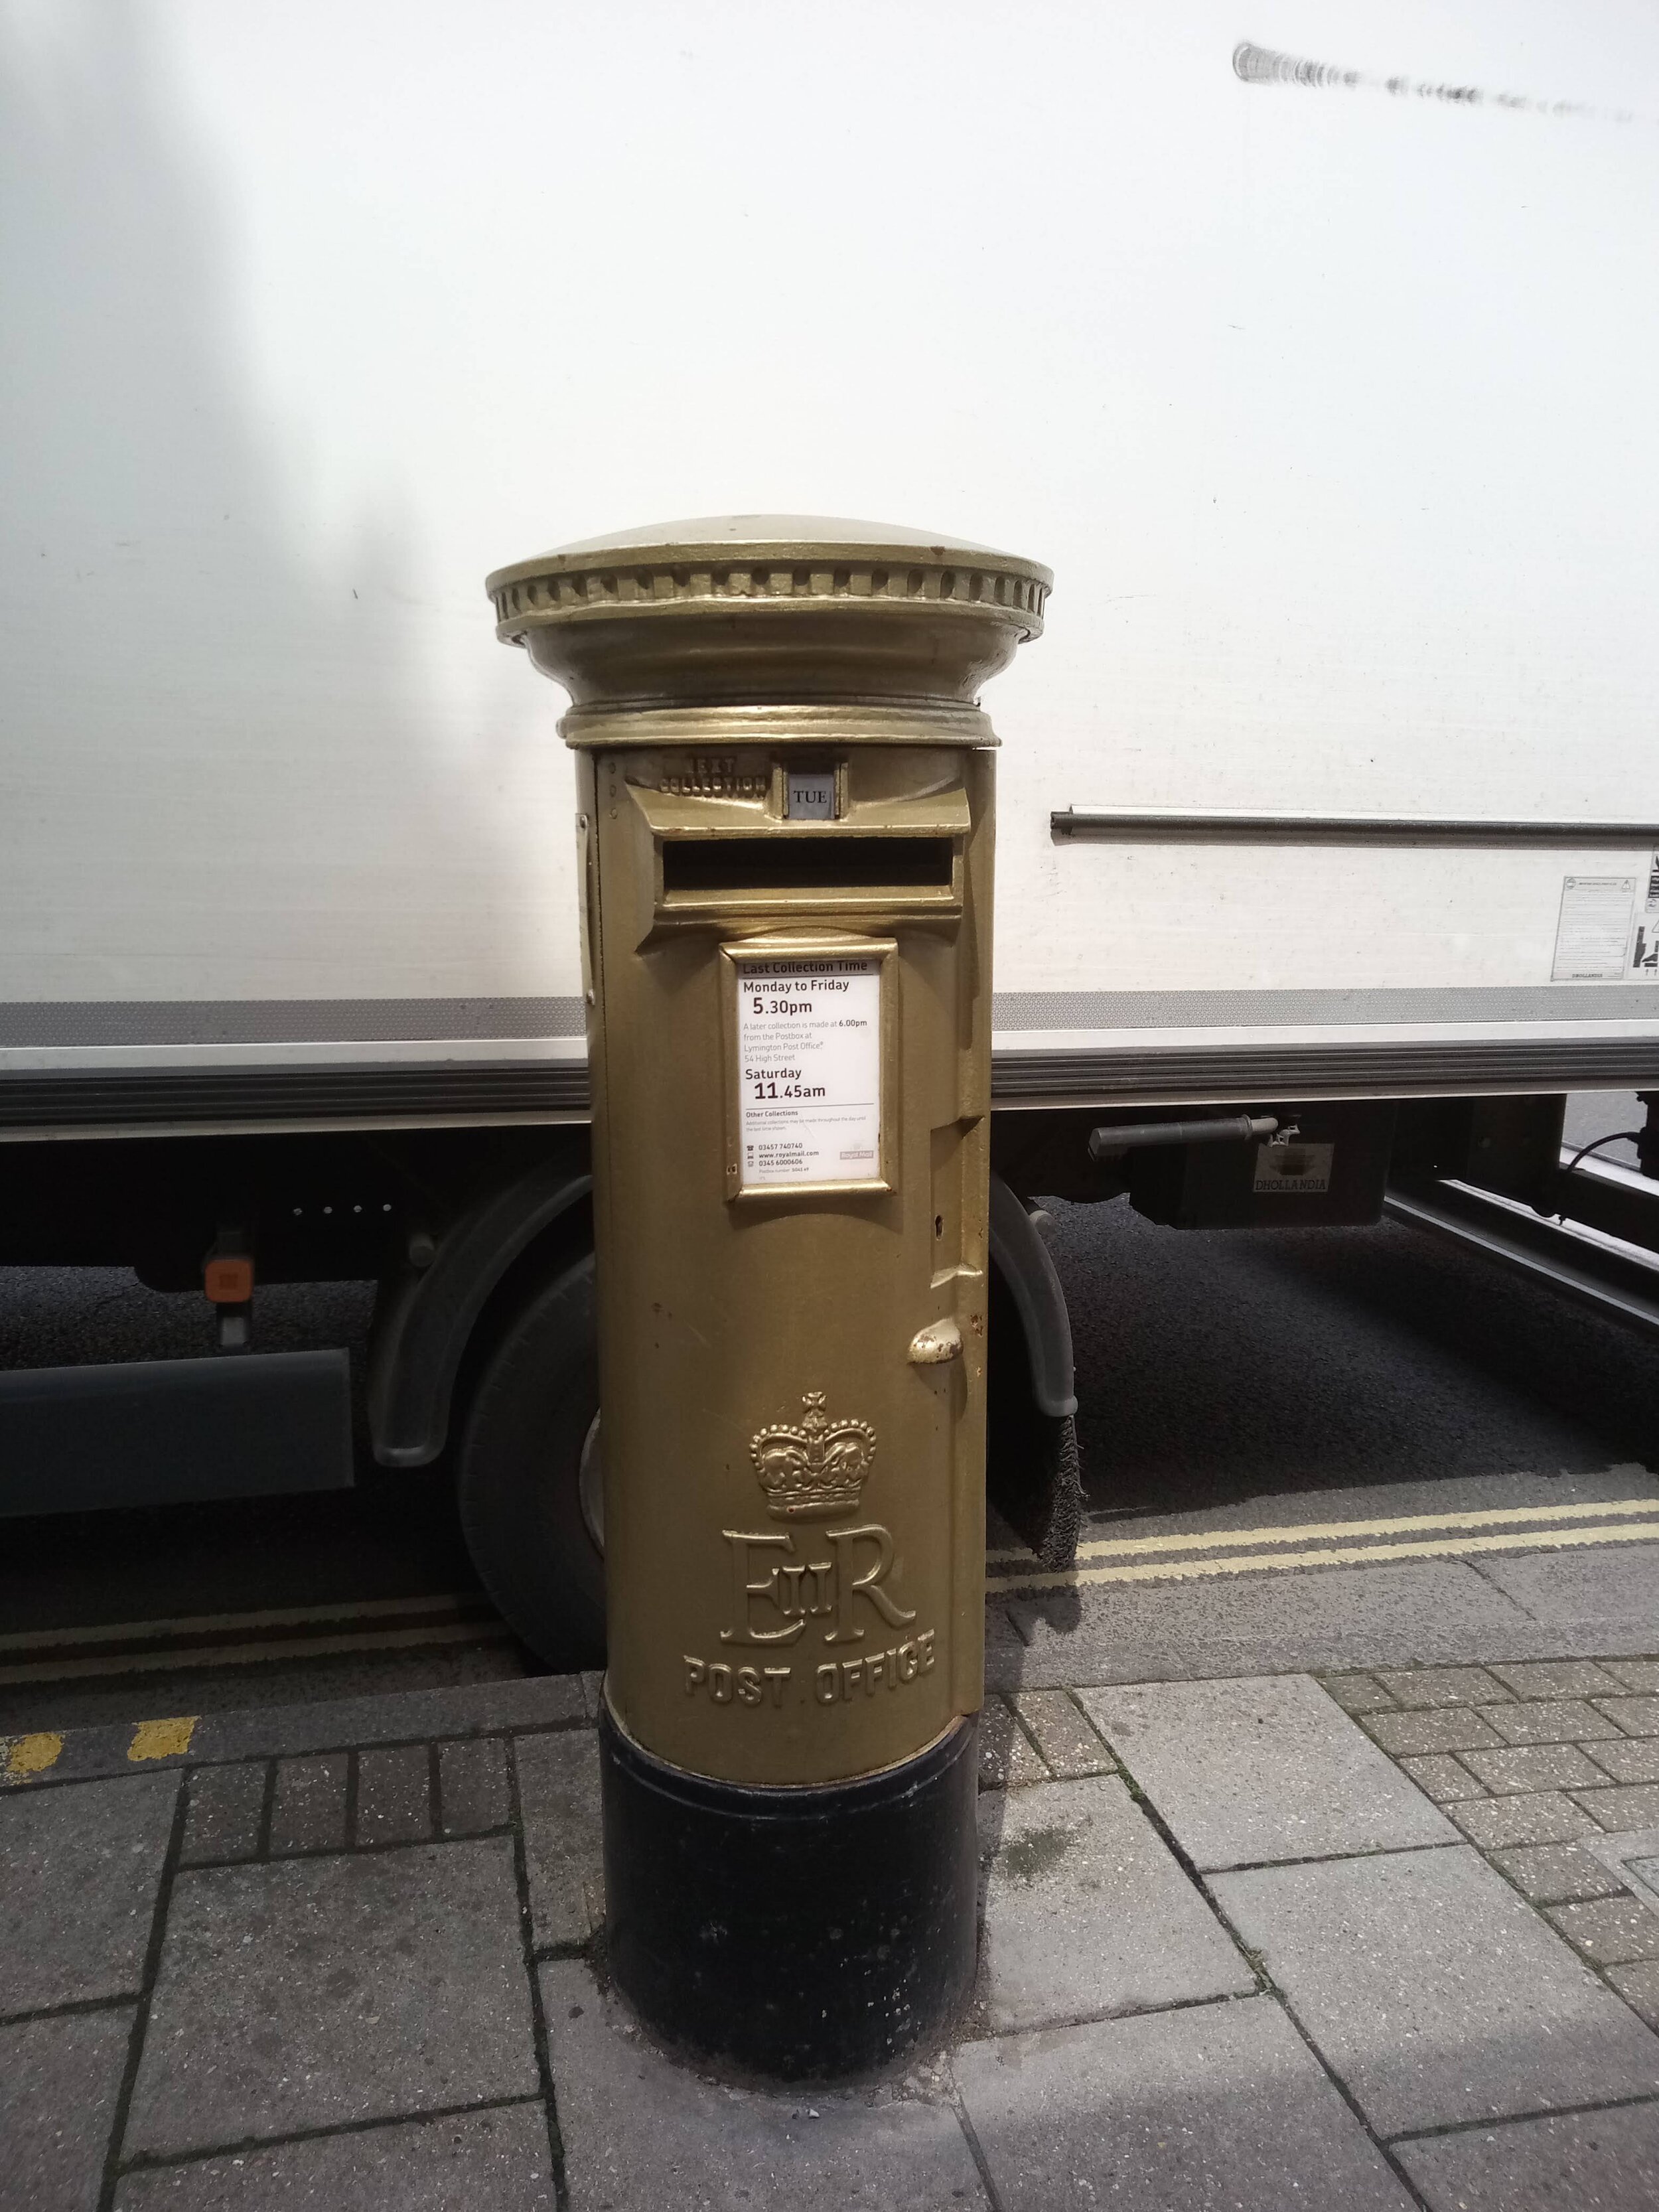  This wonderful gold postbox can be found in Lymington 